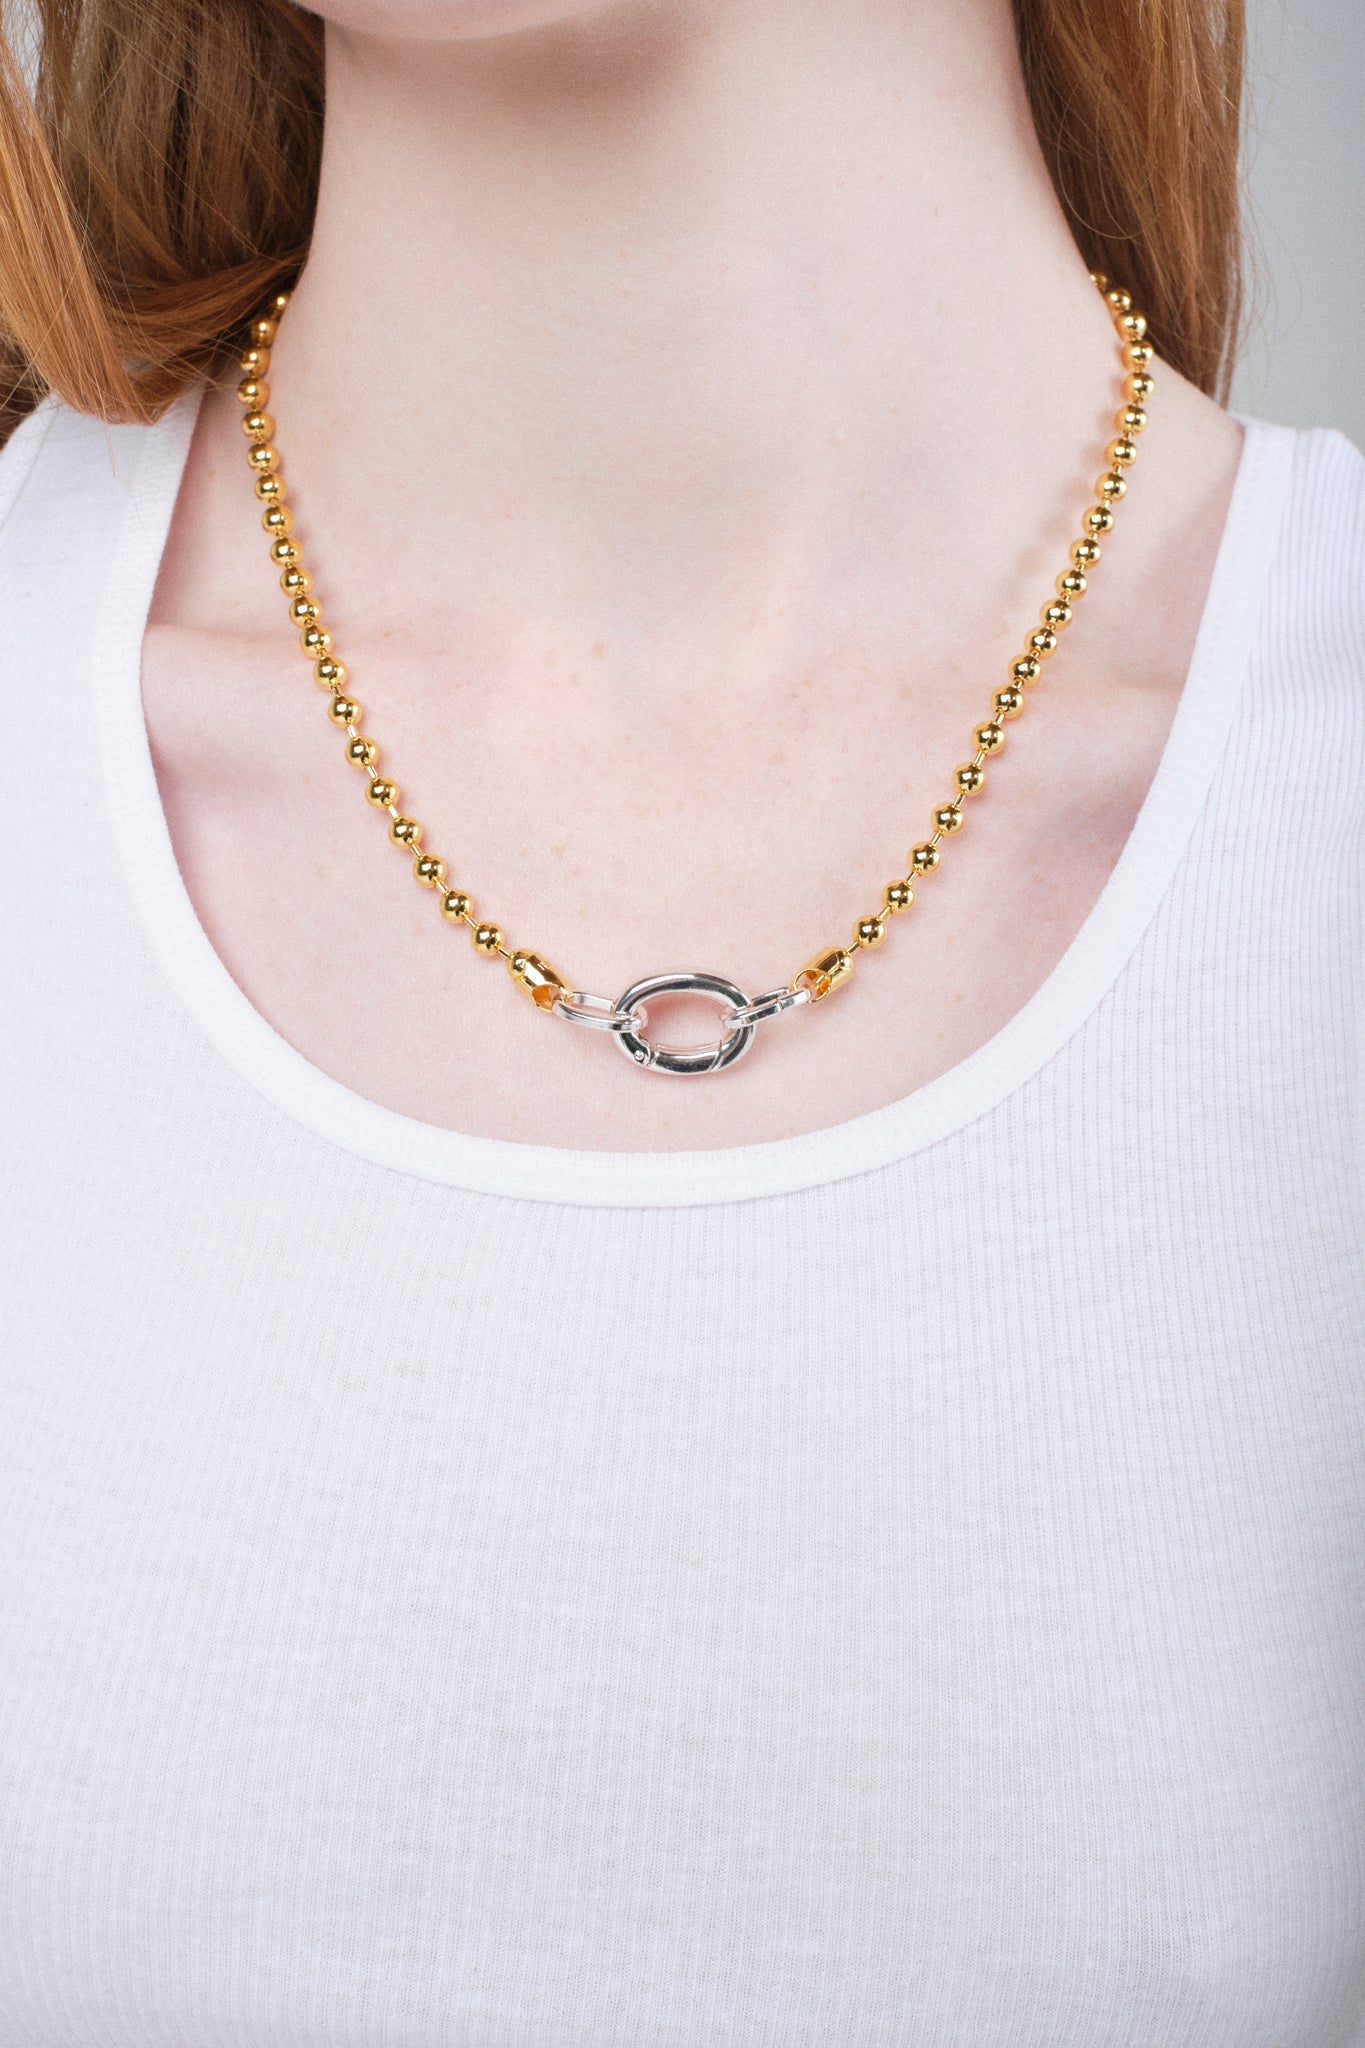 The Billie Chain Necklace